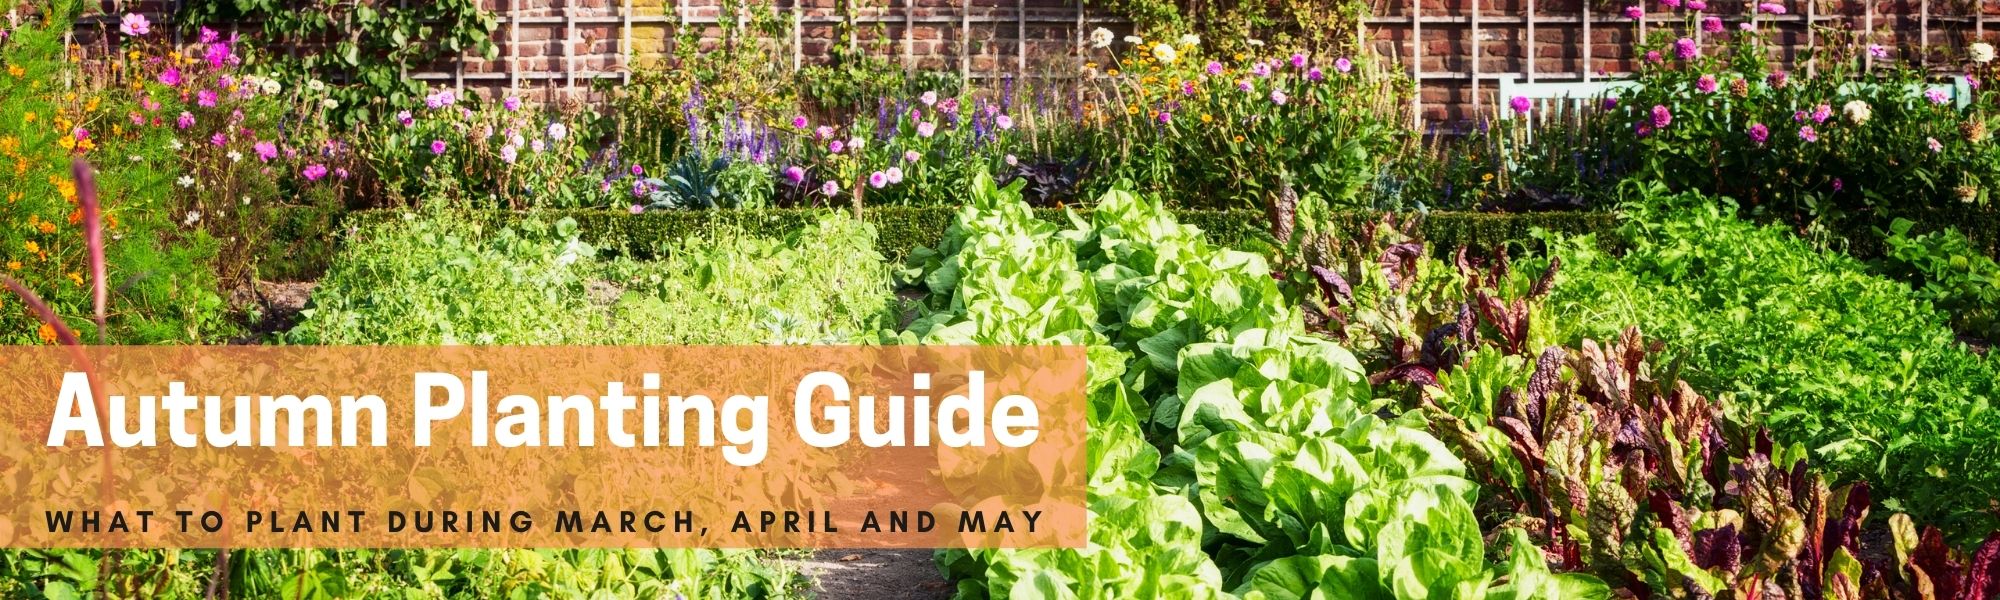 Autumn Sowing Guide